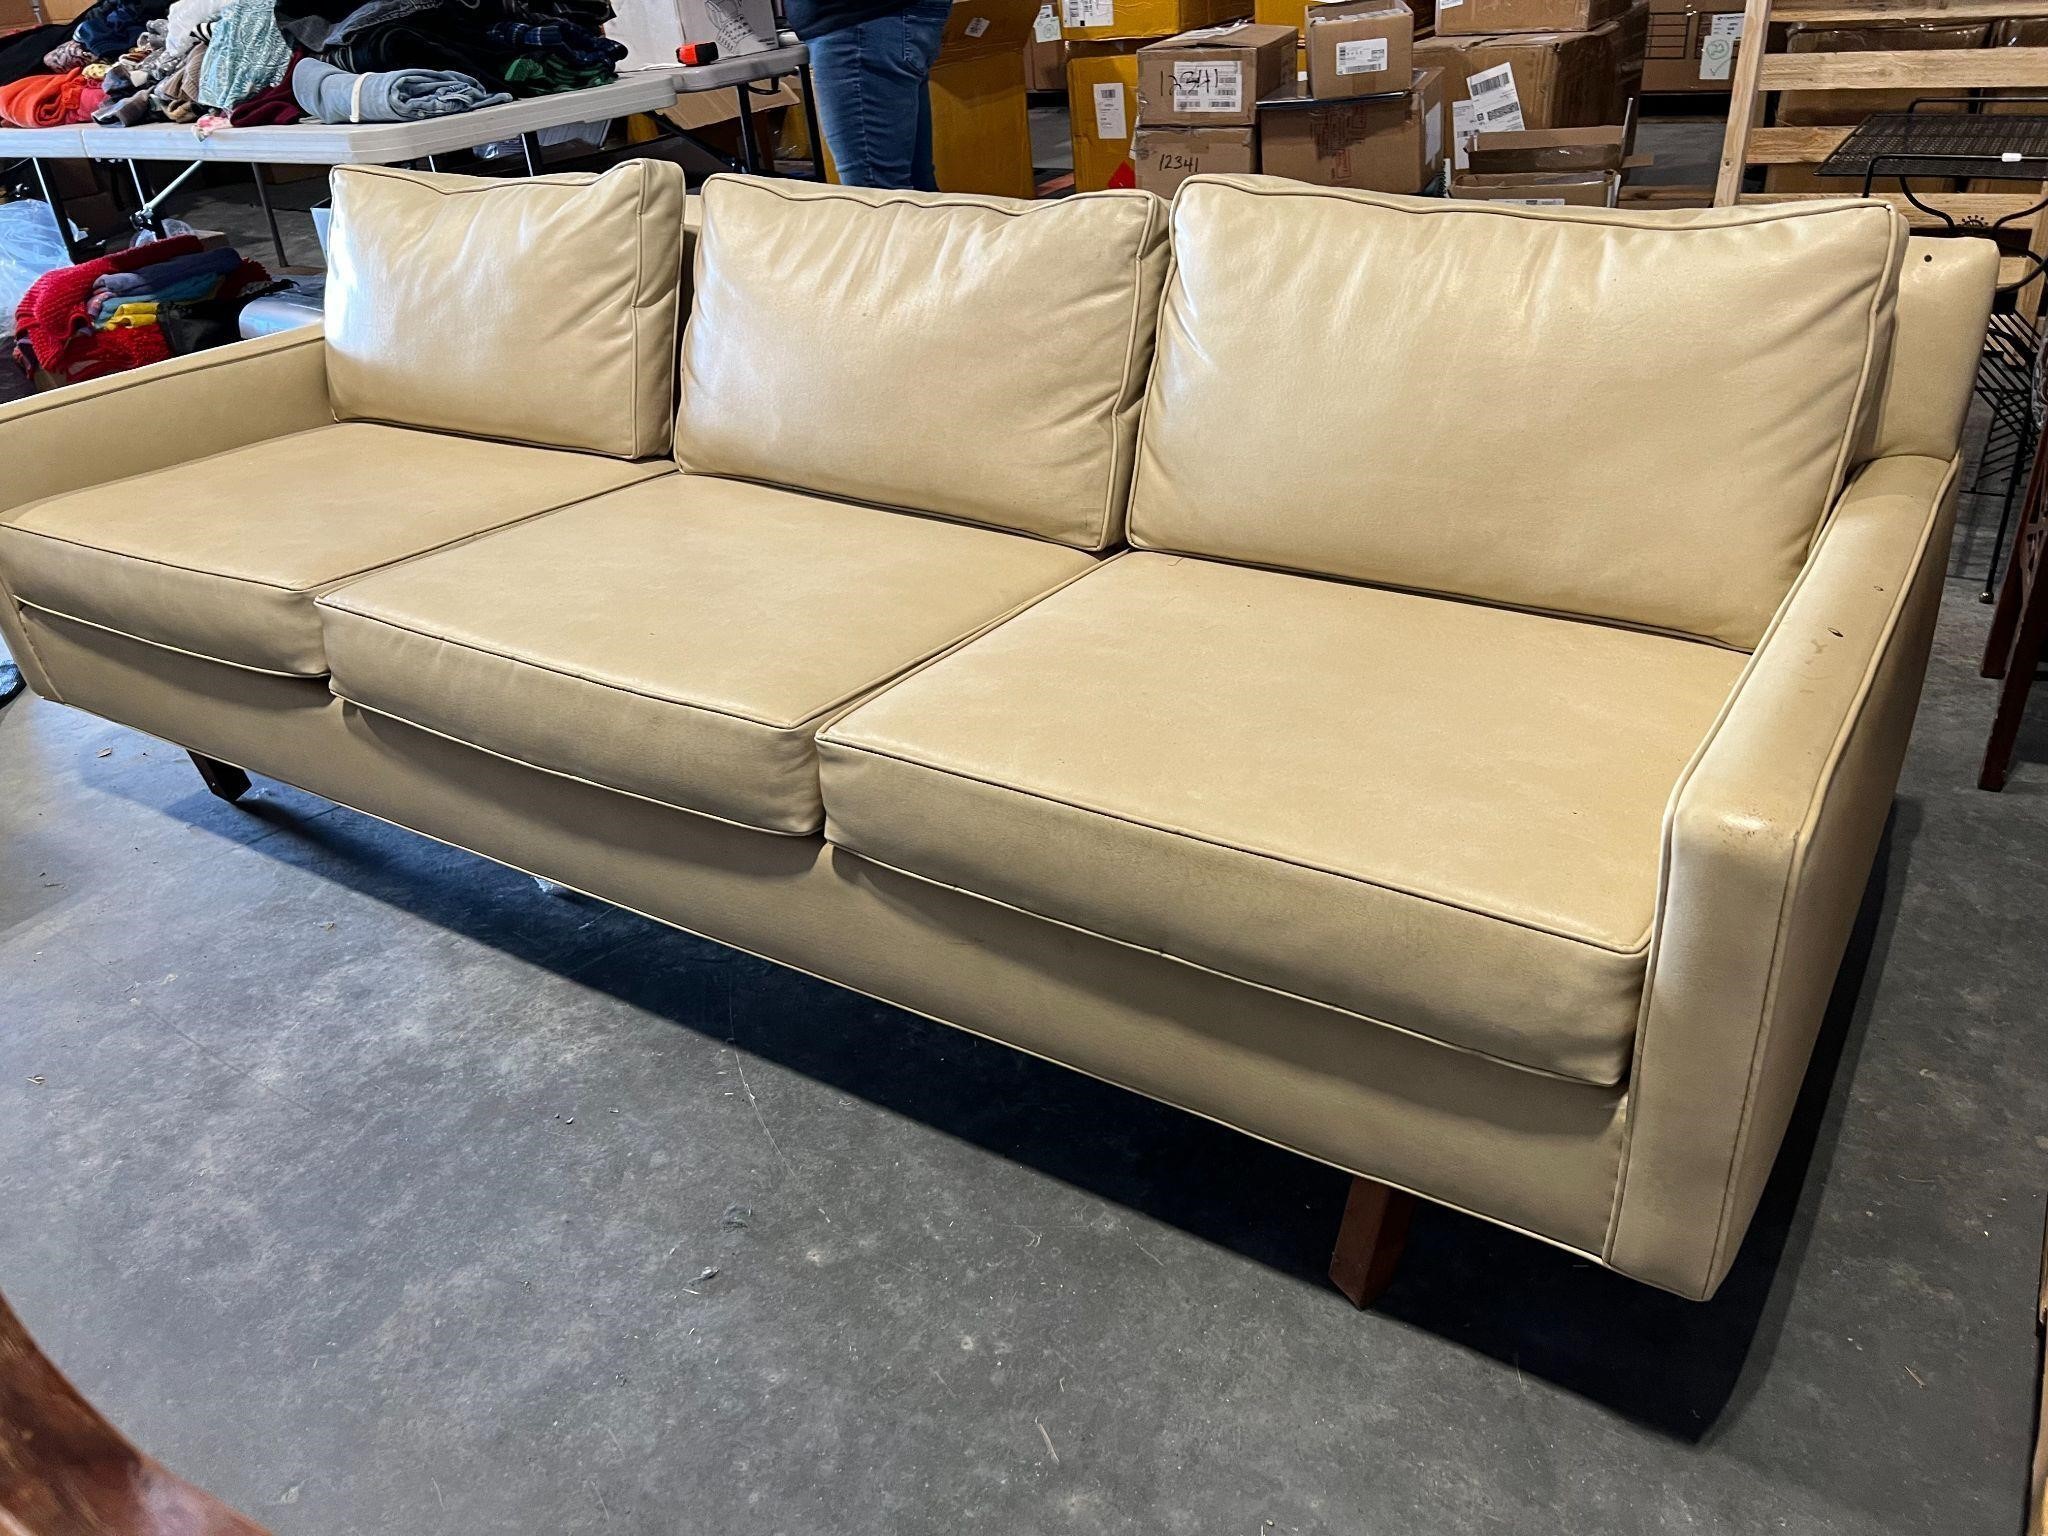 CREAM LEATHER COUCH